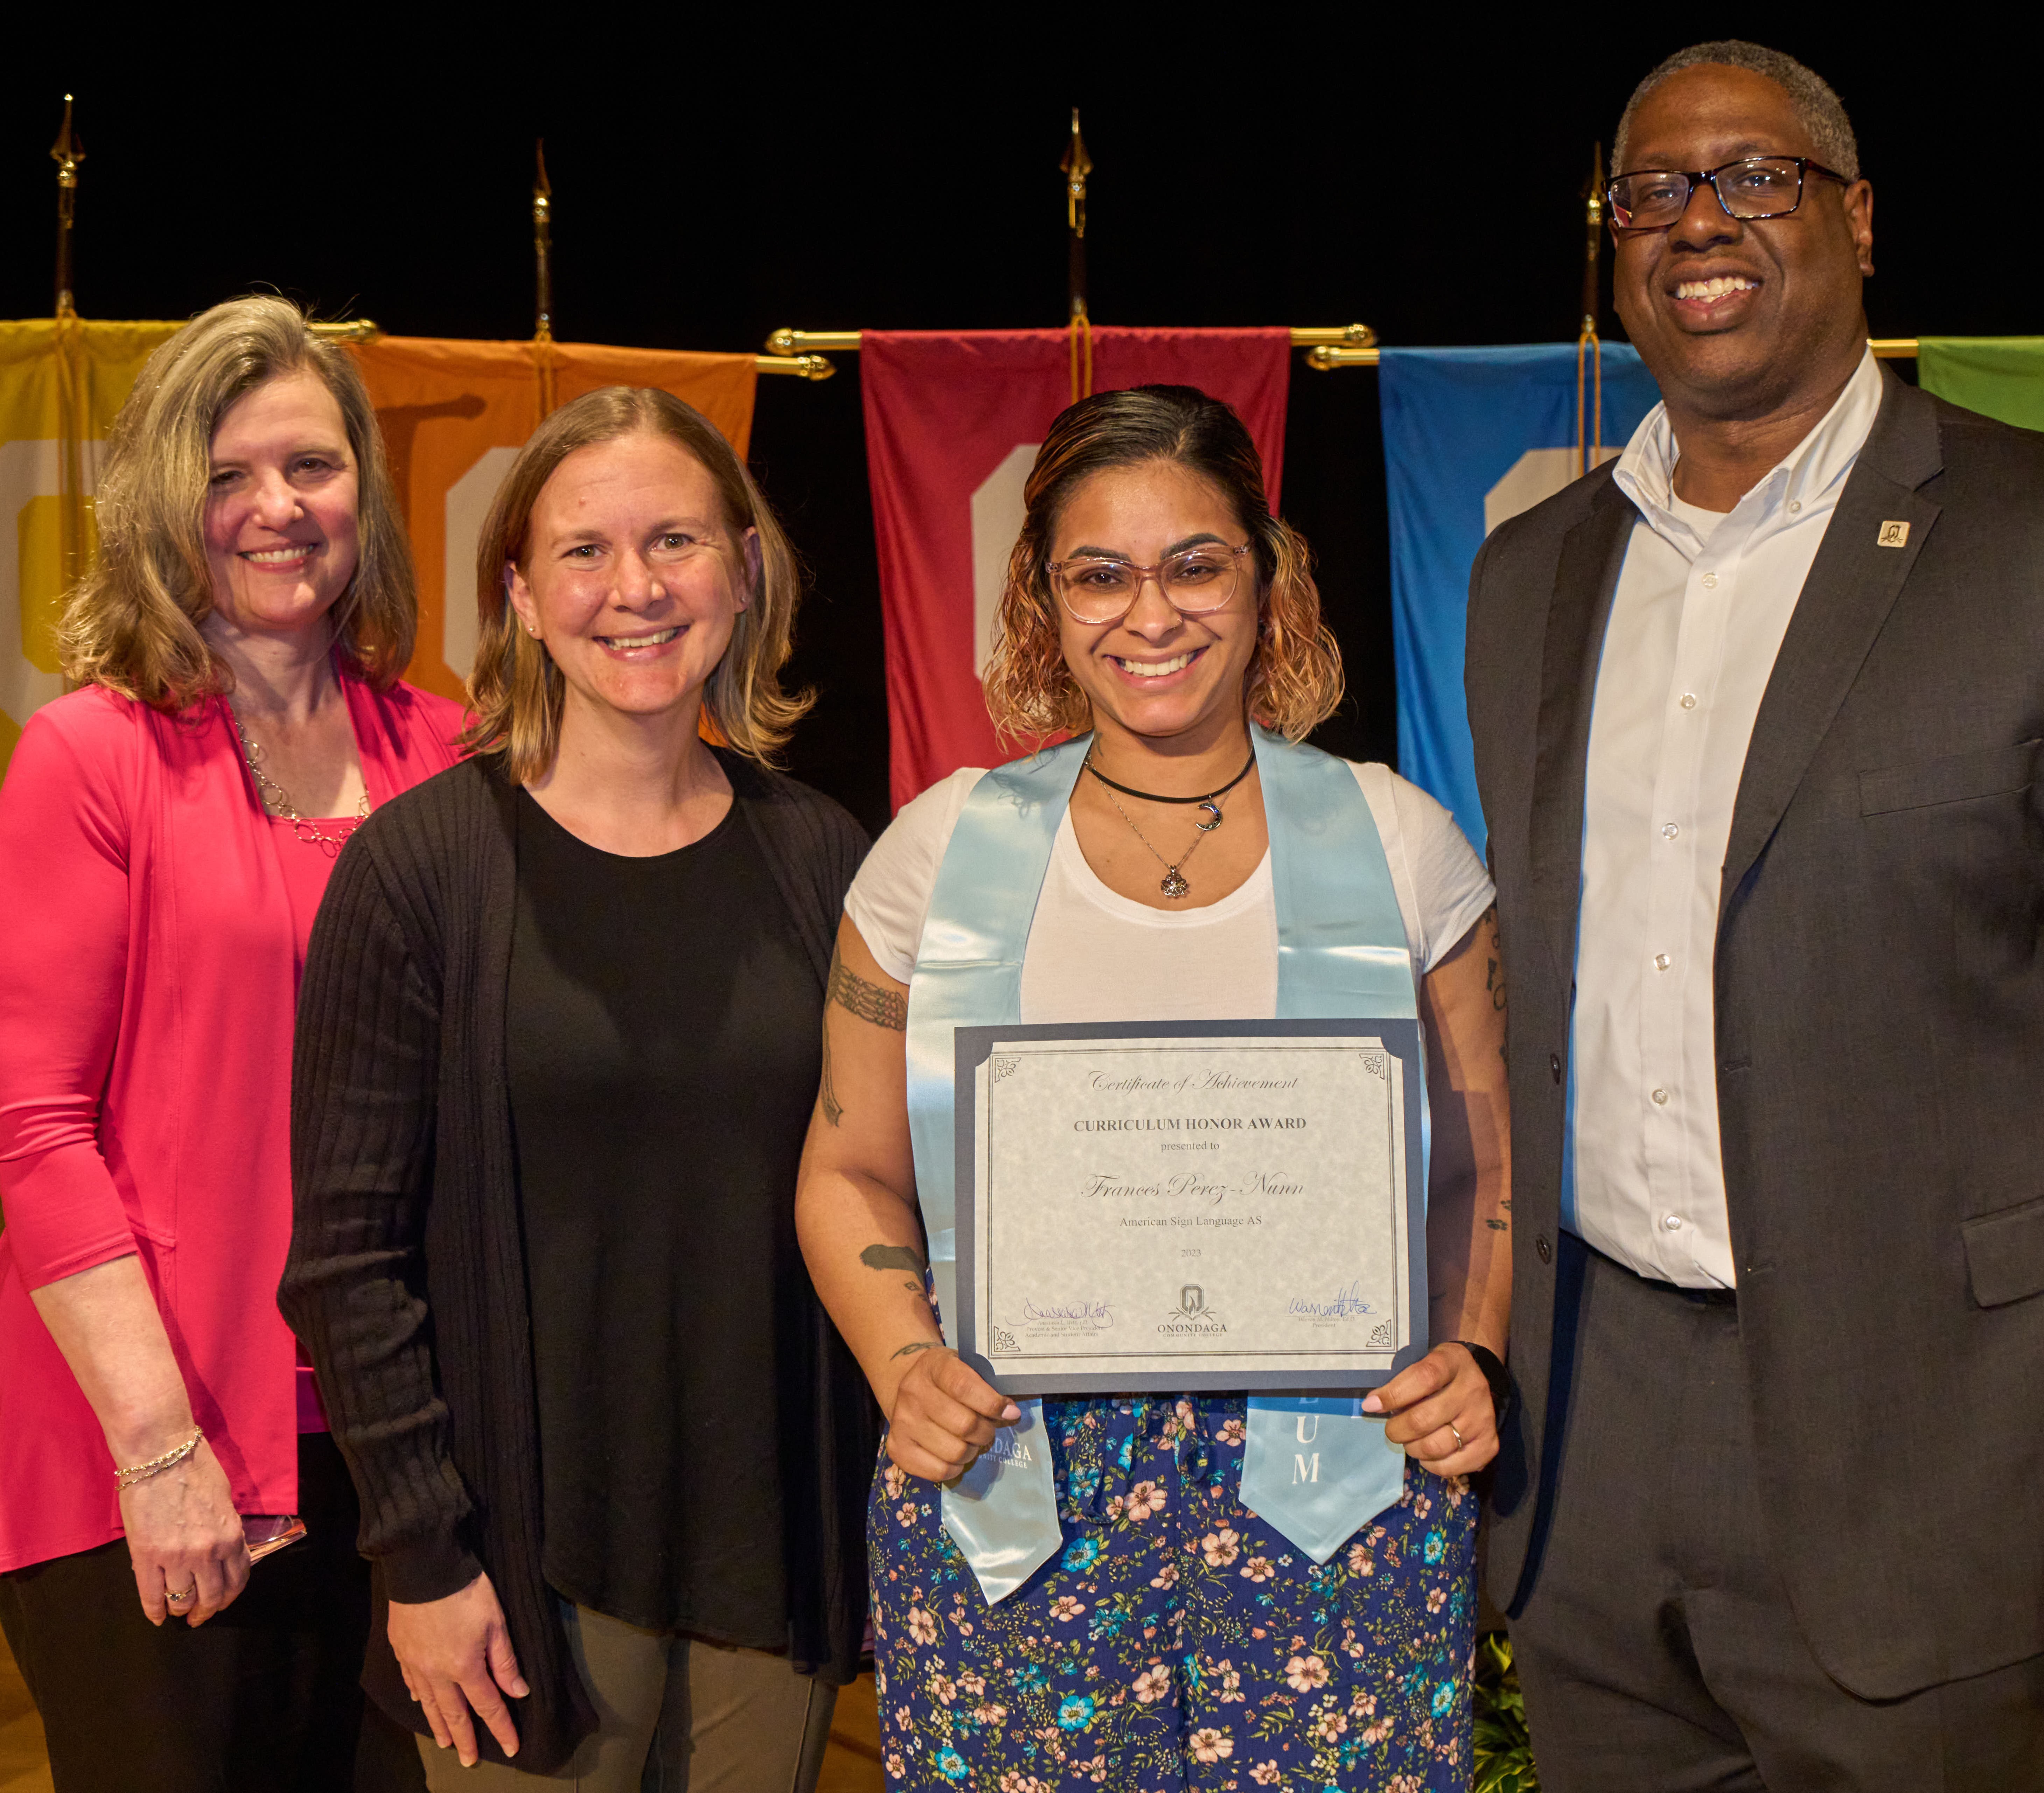 Frances Perez-Nunn, Curriculum Honoree for American Sign Language